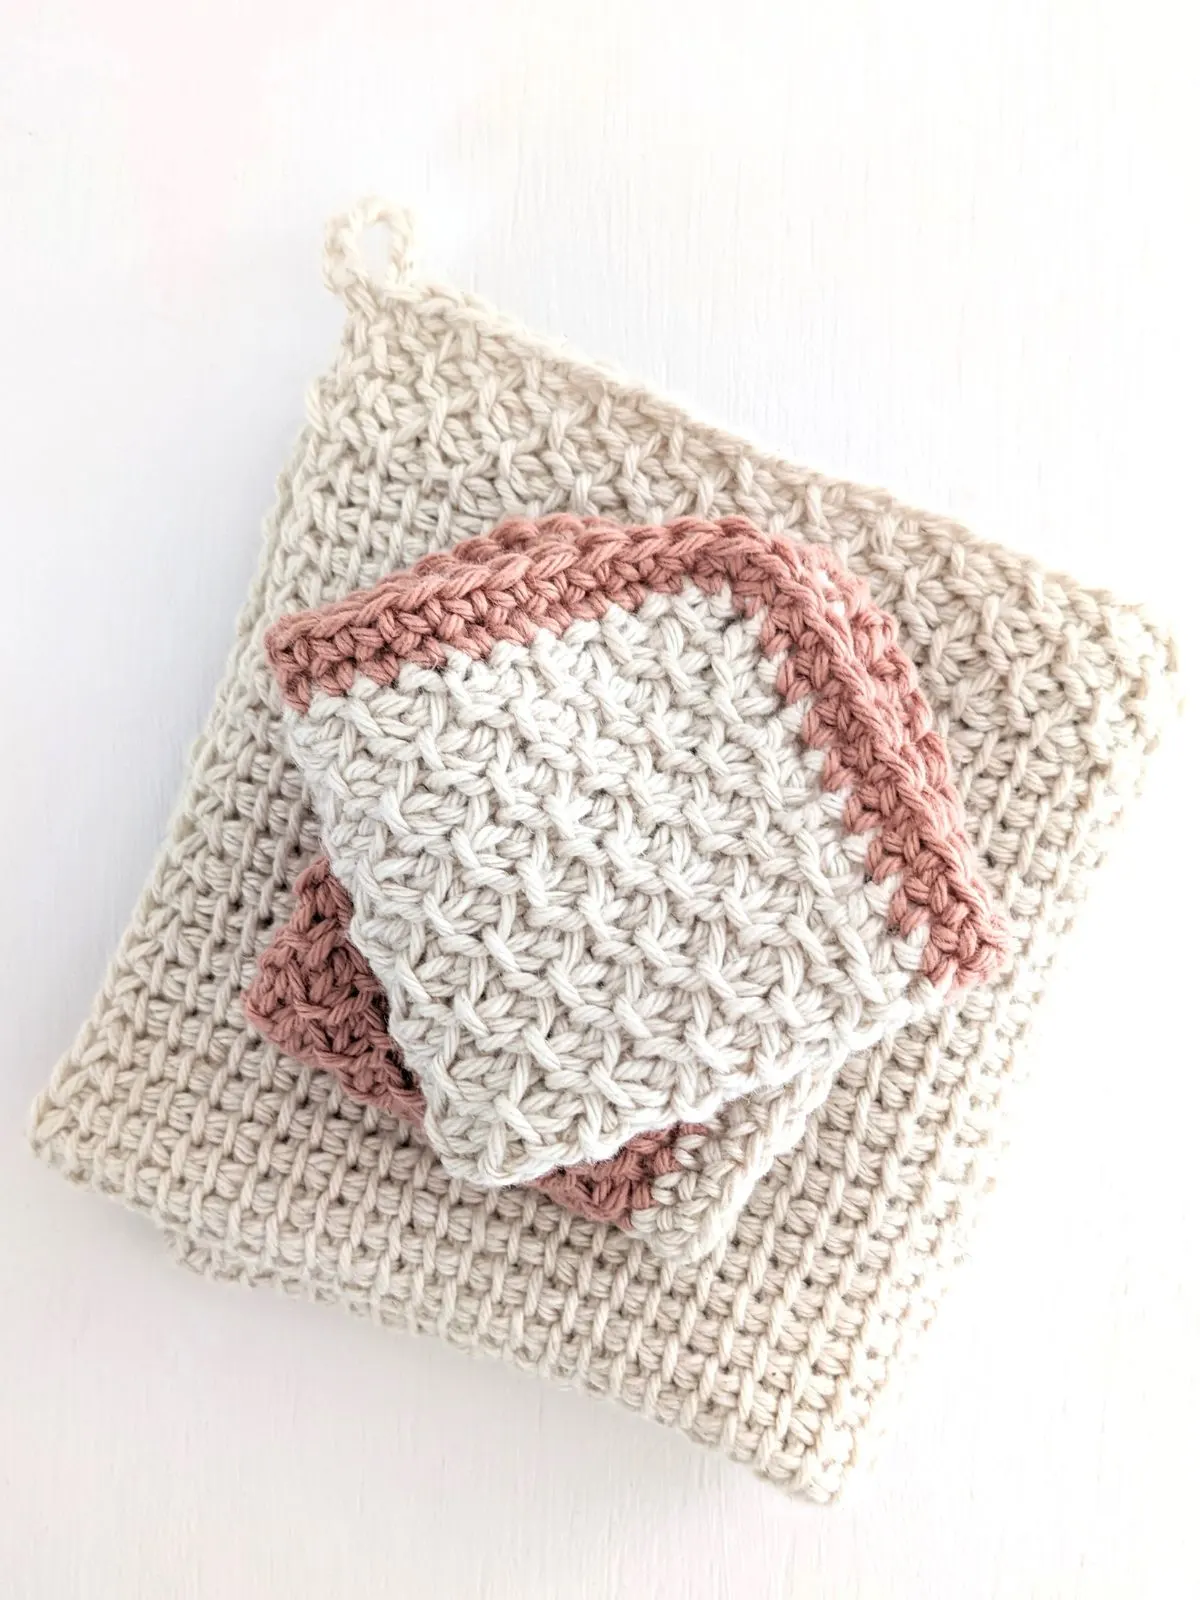 A Tunisian crochet washcloth pattern that uses the honeycomb stitch.